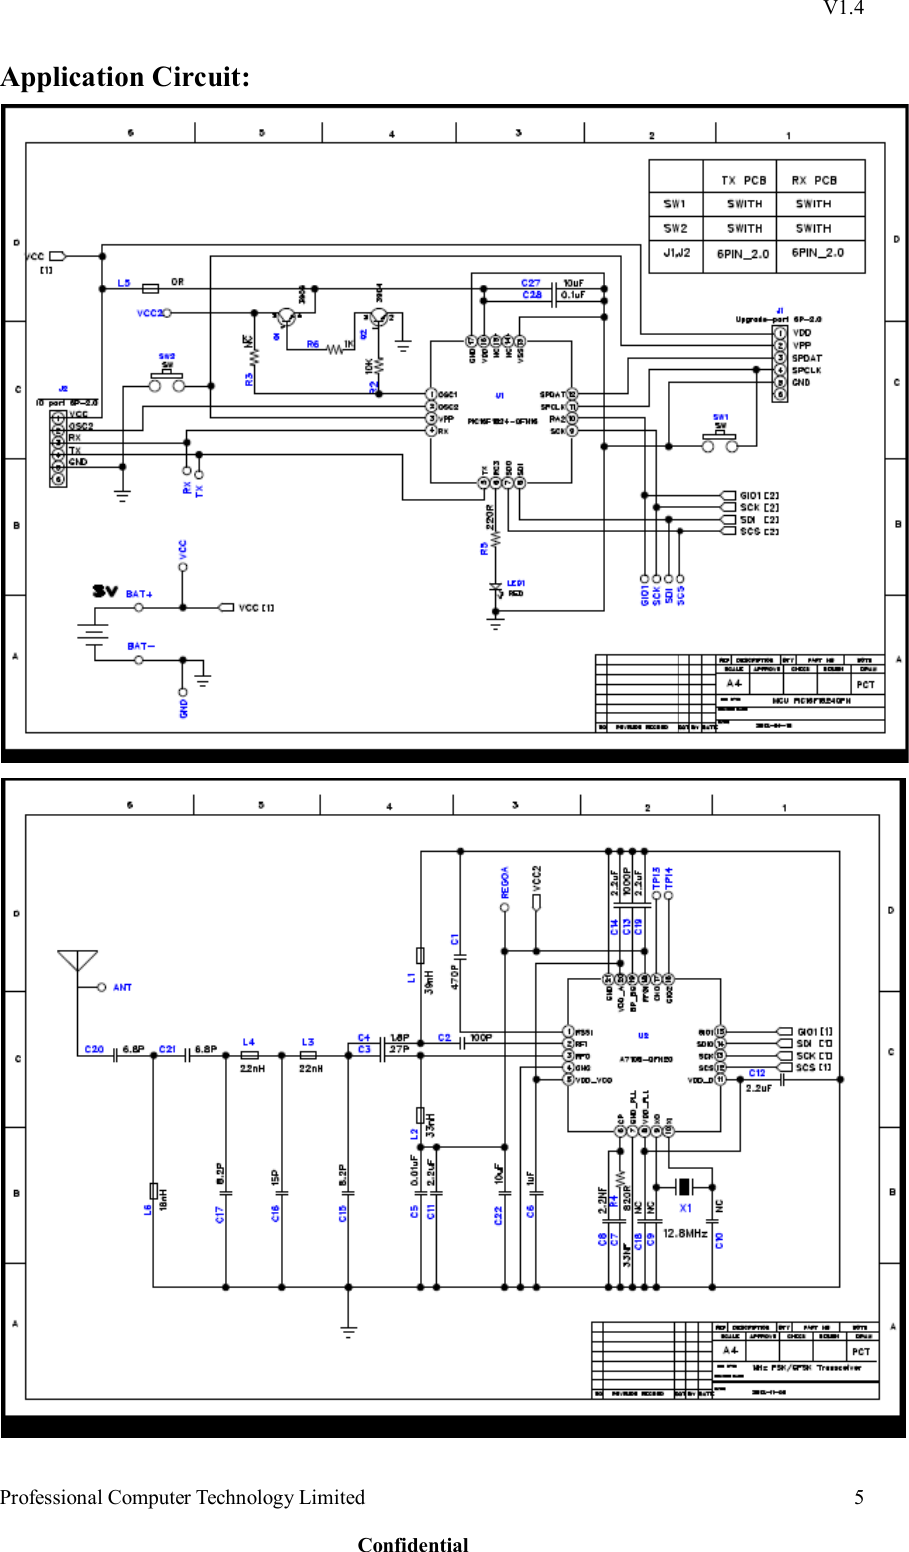     V1.4 Professional Computer Technology Limited  Confidential 5 Application Circuit:    